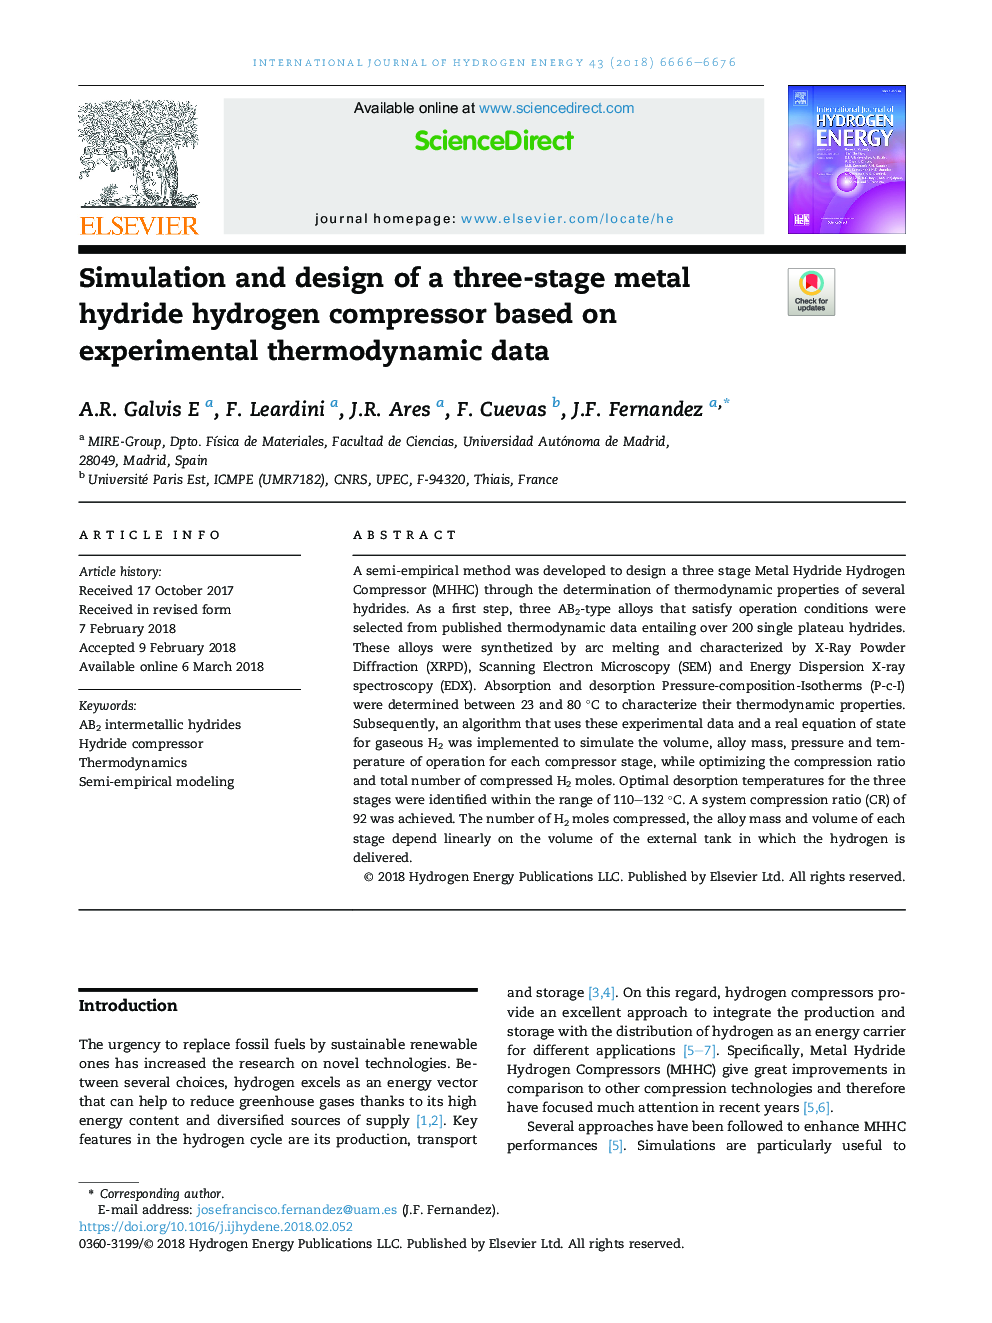 Simulation and design of a three-stage metal hydride hydrogen compressor based on experimental thermodynamic data